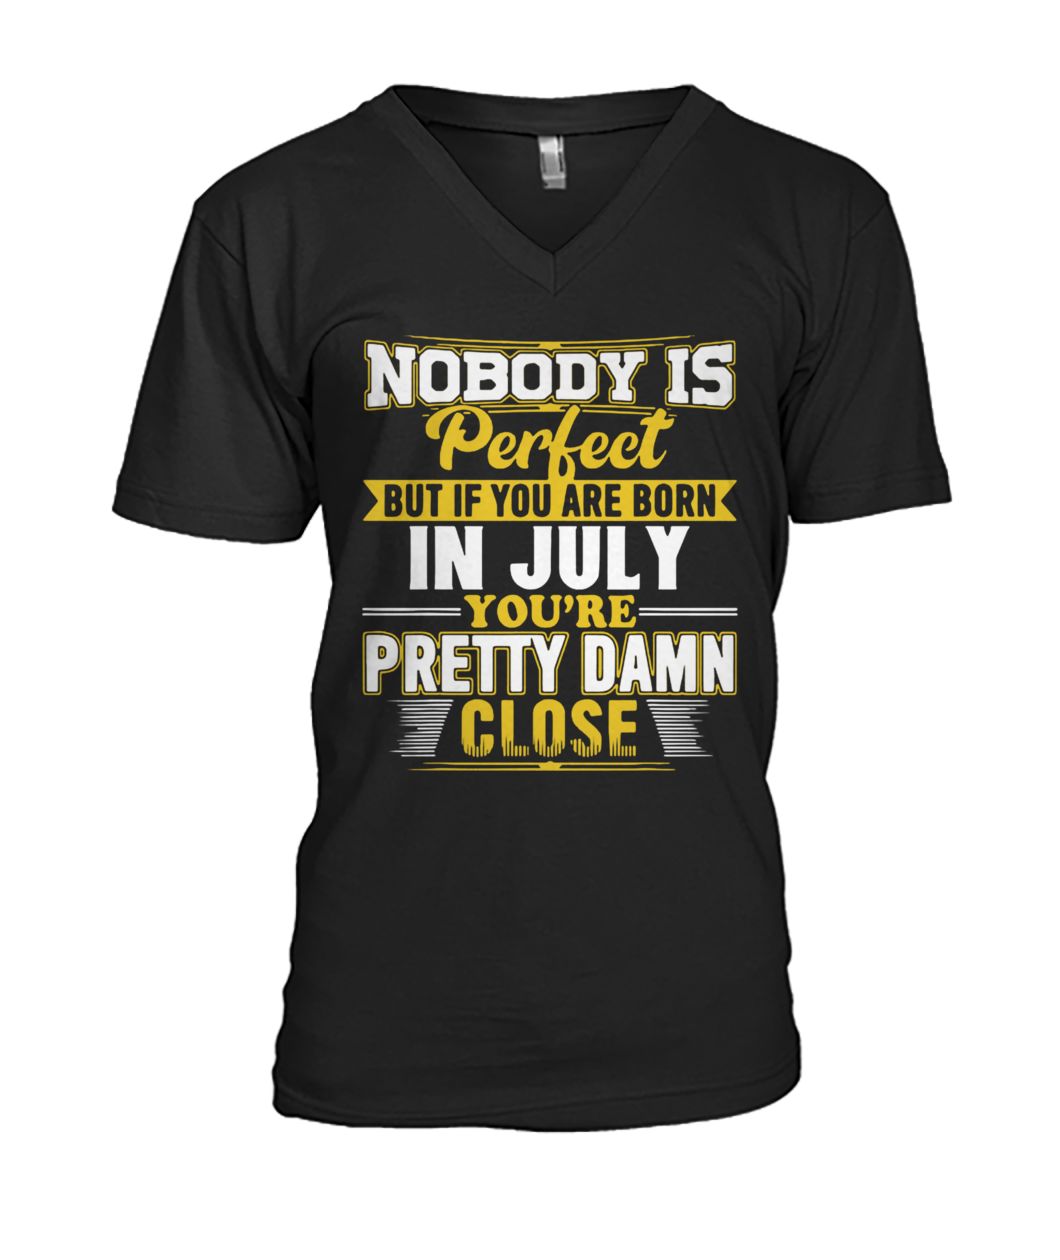 Nobody is perfect but if you are born in July you're pretty damn close mens v-neck